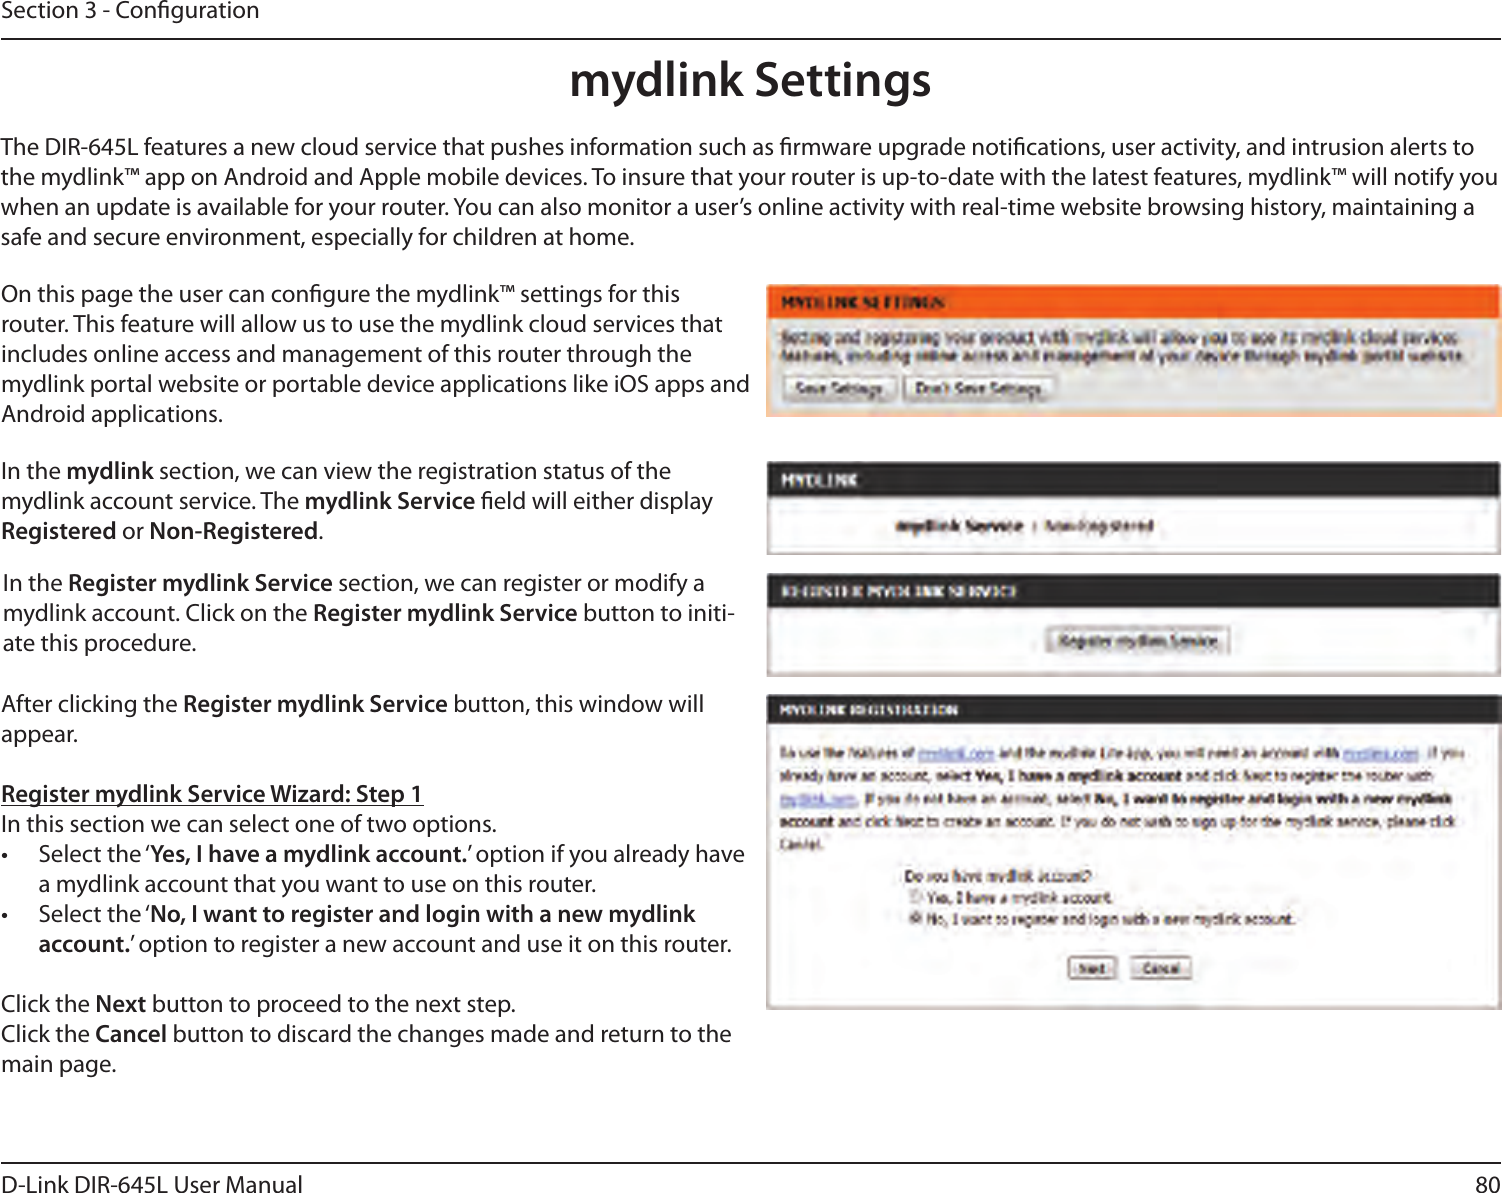 80D-Link DIR-645L User ManualSection 3 - Congurationmydlink SettingsOn this page the user can congure the mydlink™ settings for this router. This feature will allow us to use the mydlink cloud services that includes online access and management of this router through the mydlink portal website or portable device applications like iOS apps and Android applications.In the mydlink section, we can view the registration status of the mydlink account service. The mydlink Service eld will either display Registered or Non-Registered.In the Register mydlink Service section, we can register or modify a mydlink account. Click on the Register mydlink Service button to initi-ate this procedure.After clicking the Register mydlink Service button, this window will appear.Register mydlink Service Wizard: Step 1In this section we can select one of two options.•  Select the ‘Yes, I have a mydlink account.’ option if you already have a mydlink account that you want to use on this router. •  Select the ‘No, I want to register and login with a new mydlink account.’ option to register a new account and use it on this router.Click the Next button to proceed to the next step. Click the Cancel button to discard the changes made and return to the main page.The DIR-645L features a new cloud service that pushes information such as rmware upgrade notications, user activity, and intrusion alerts to the mydlink™ app on Android and Apple mobile devices. To insure that your router is up-to-date with the latest features, mydlink™ will notify you when an update is available for your router. You can also monitor a user’s online activity with real-time website browsing history, maintaining a safe and secure environment, especially for children at home.